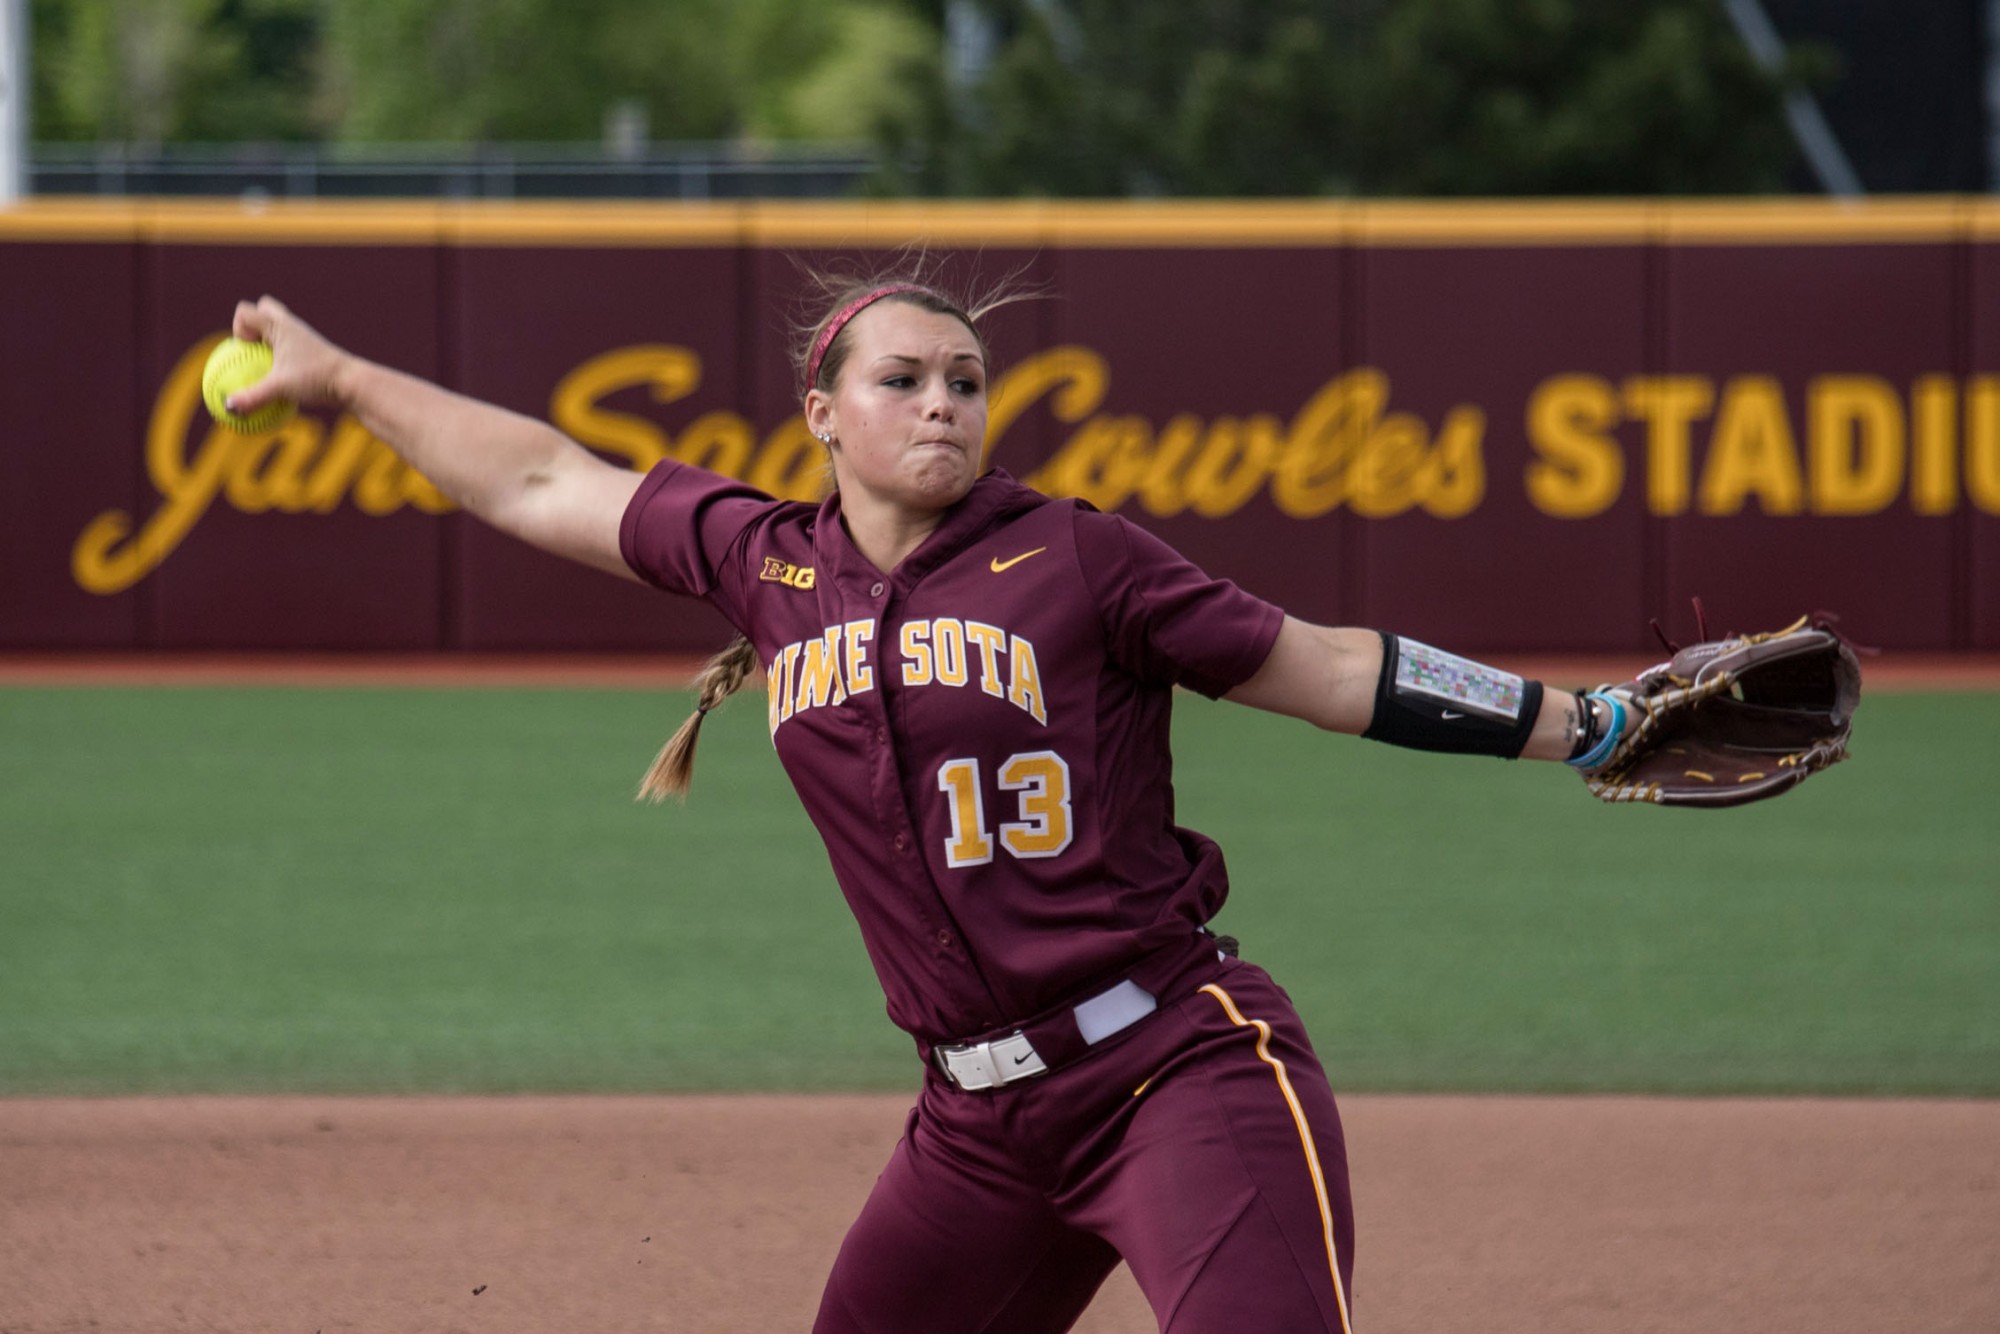 Junior Amber Fiser pitches during the game against Louisiana State University on Saturday, May 25, 2019 at the Jane Sage Cowles Stadium. (Jasmin Kemp / Minnesota Daily)